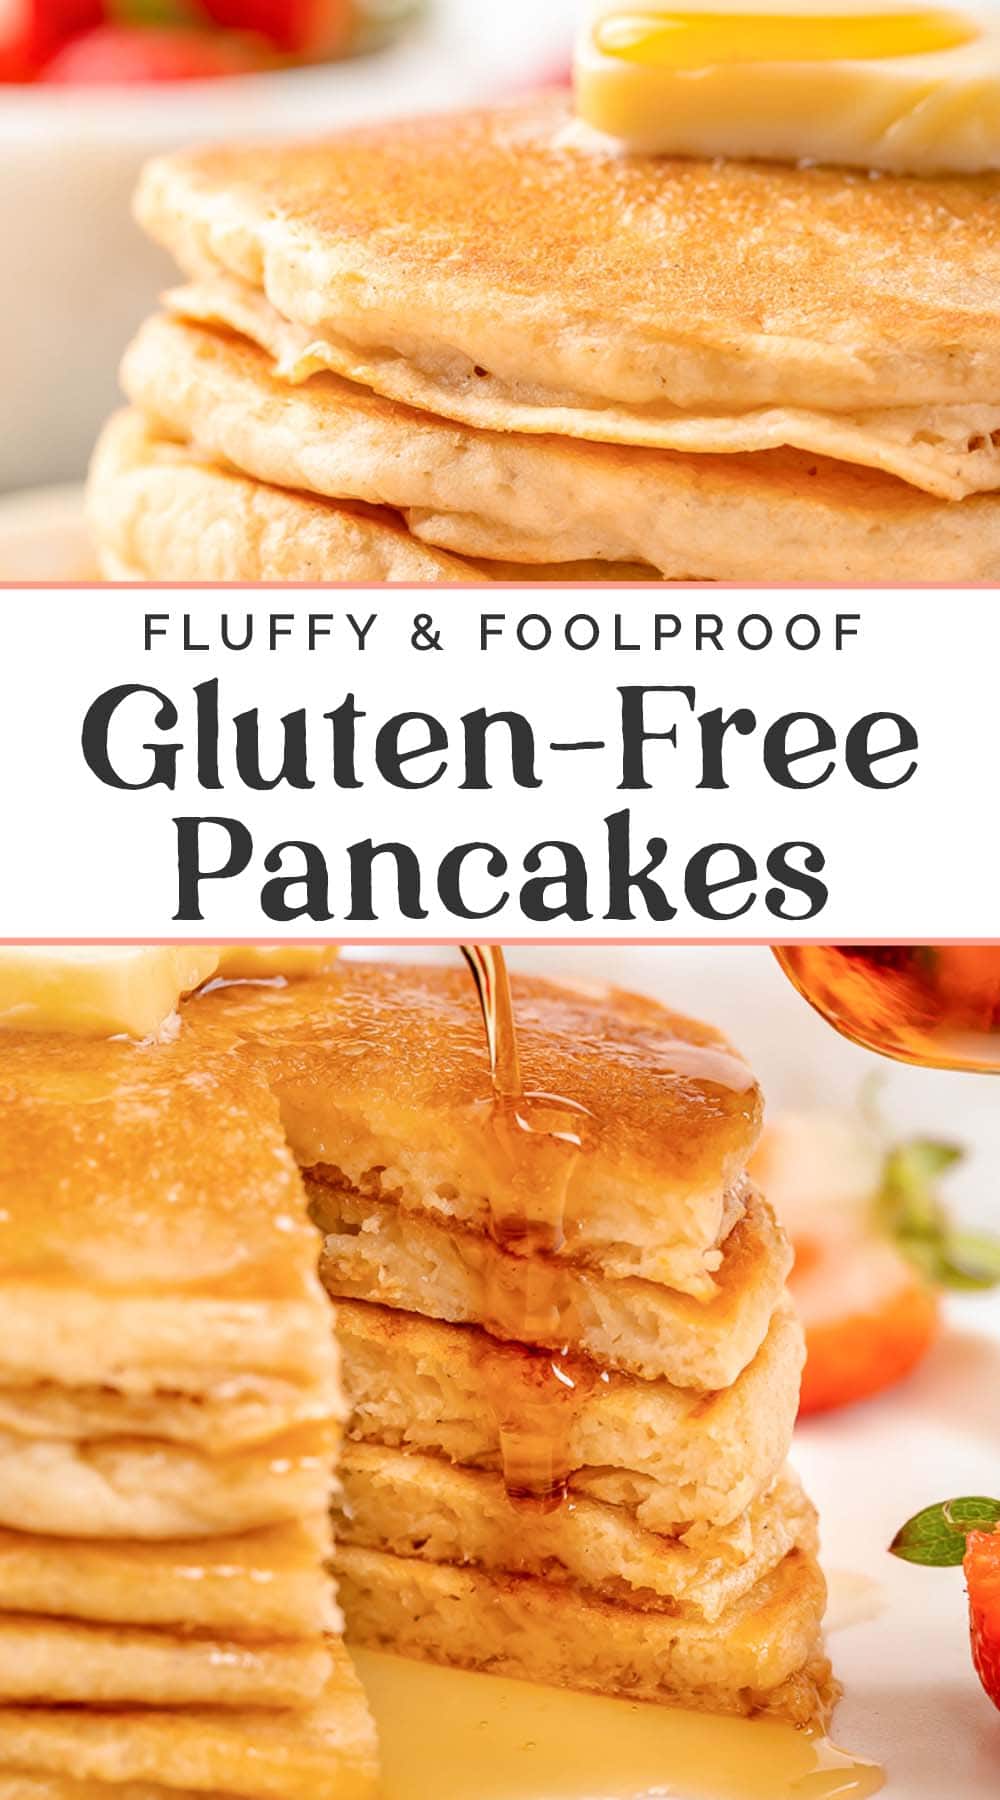 Pin graphic for gluten-free pancakes.